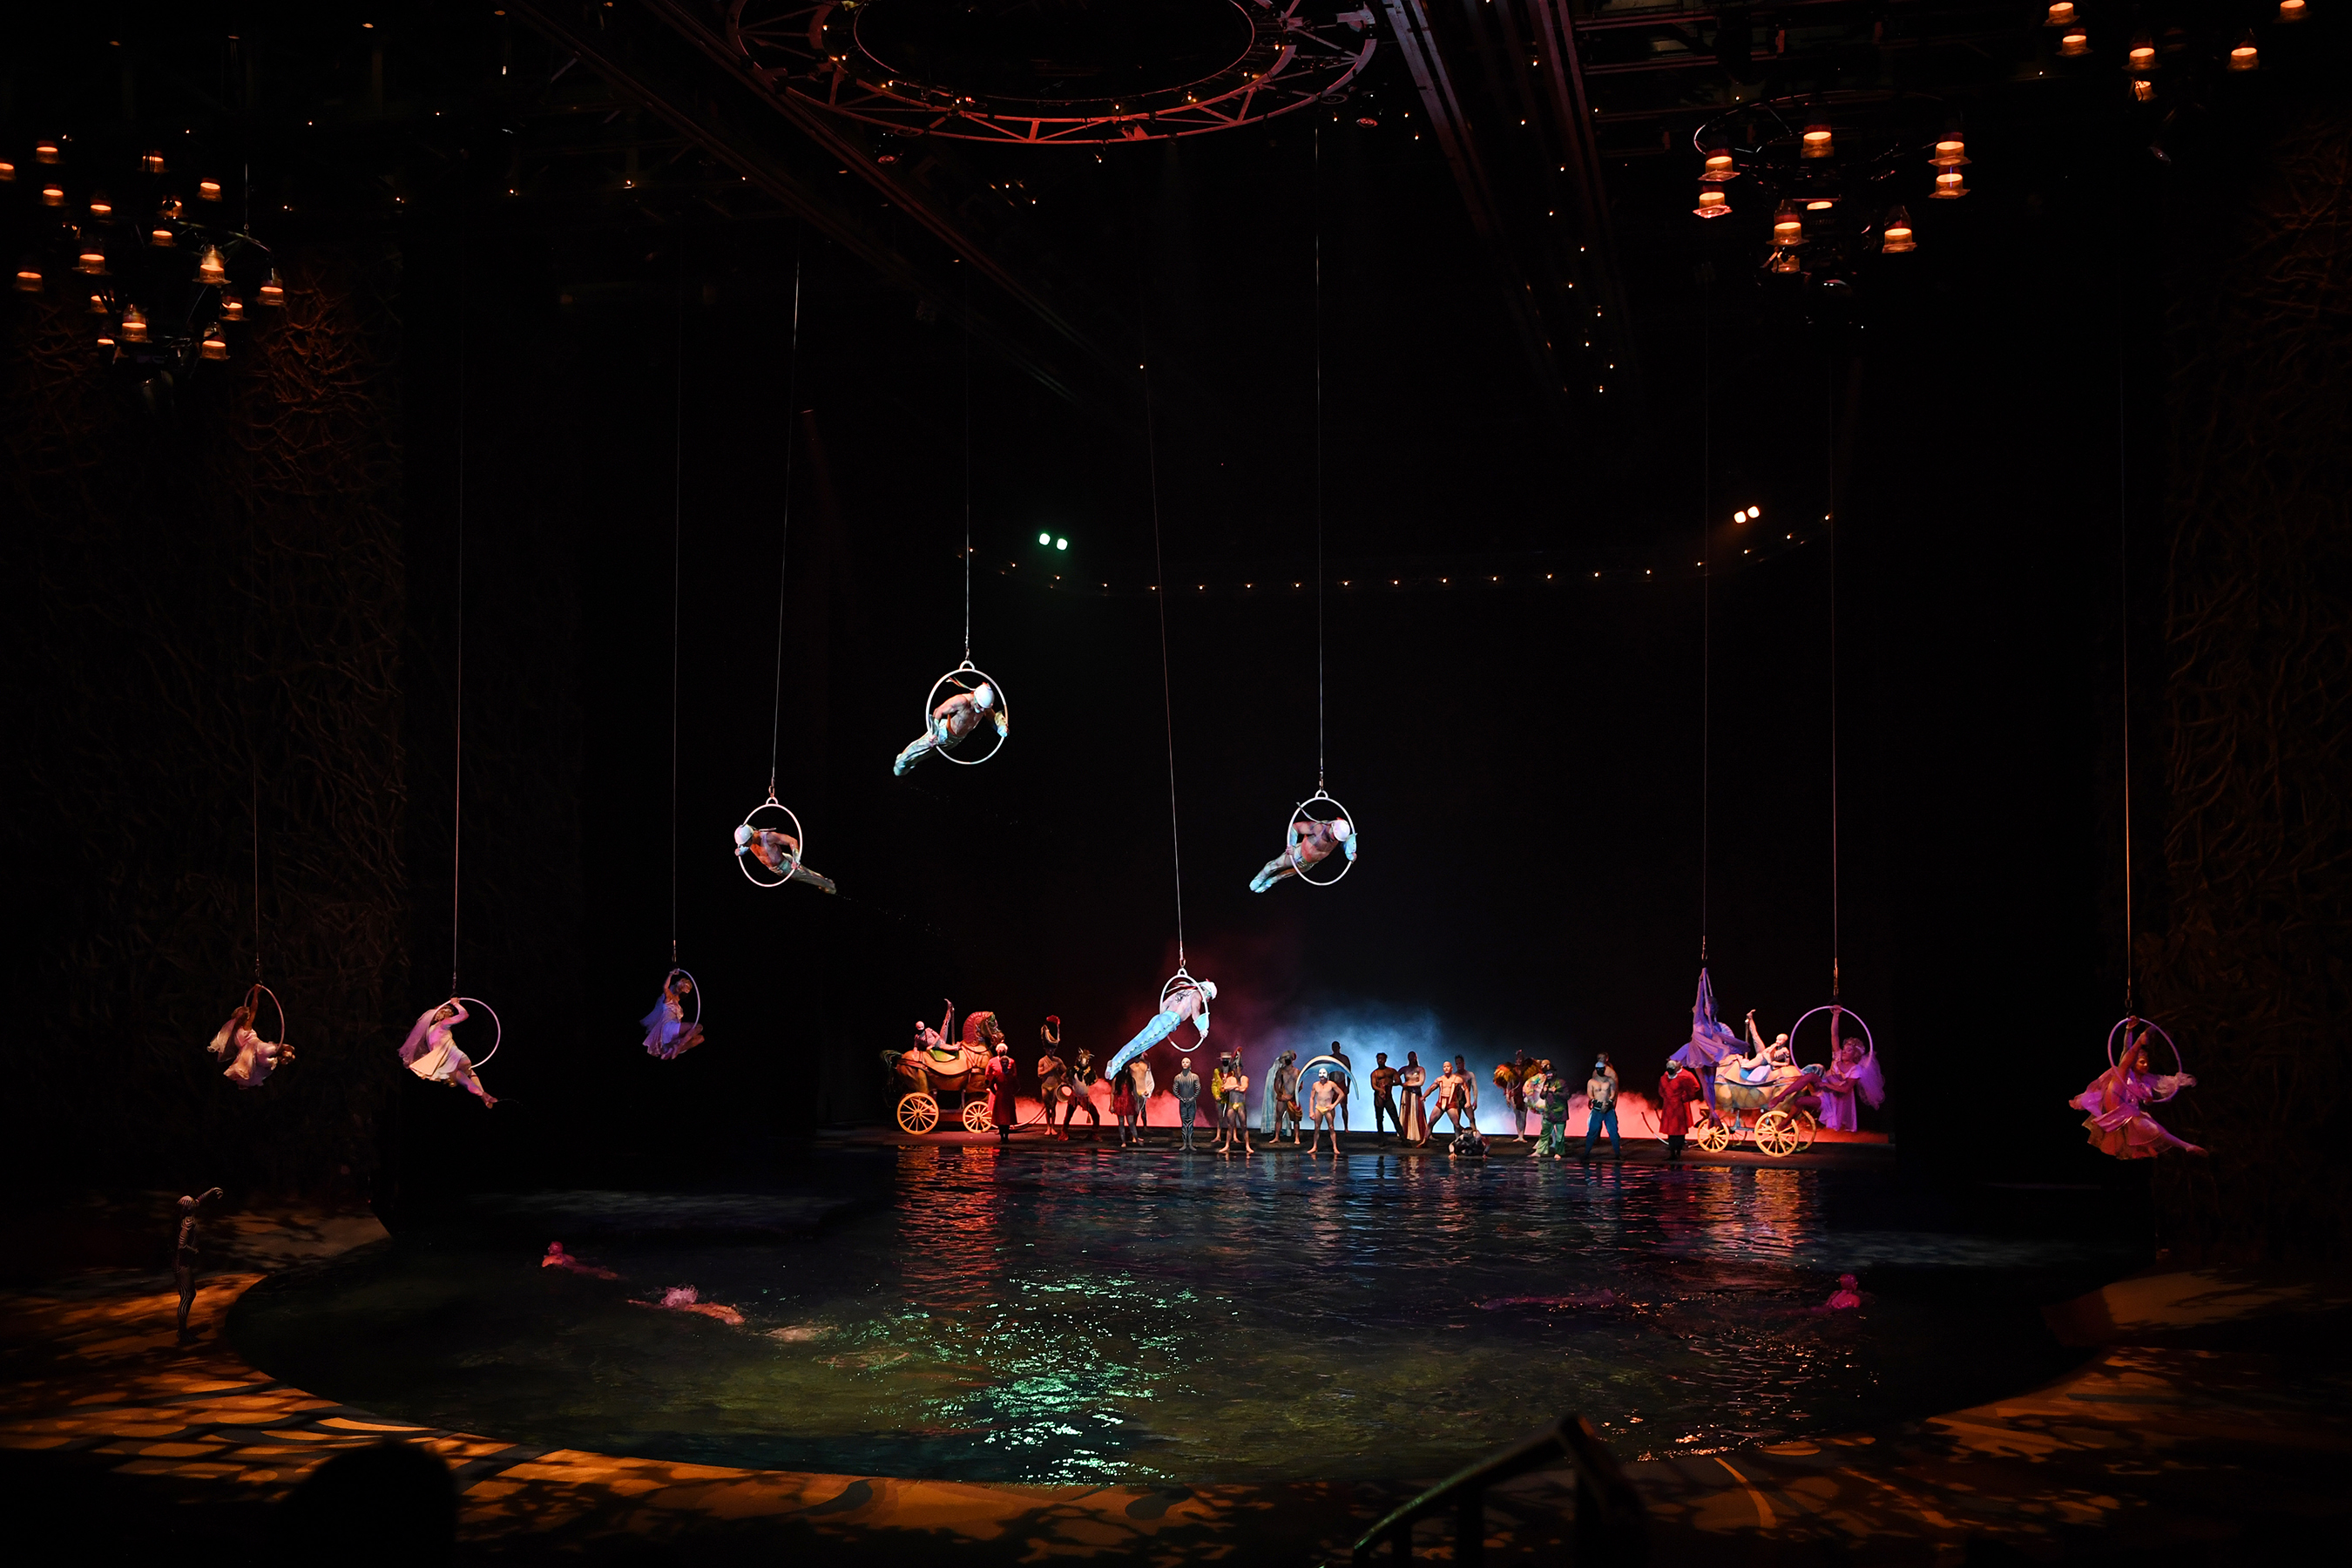 “O” by Cirque du Soleil, which has been enjoyed by more than 17 million people, celebrates its first performance in 16 months at Bellagio before a sold-out crowd on July 1, 2021